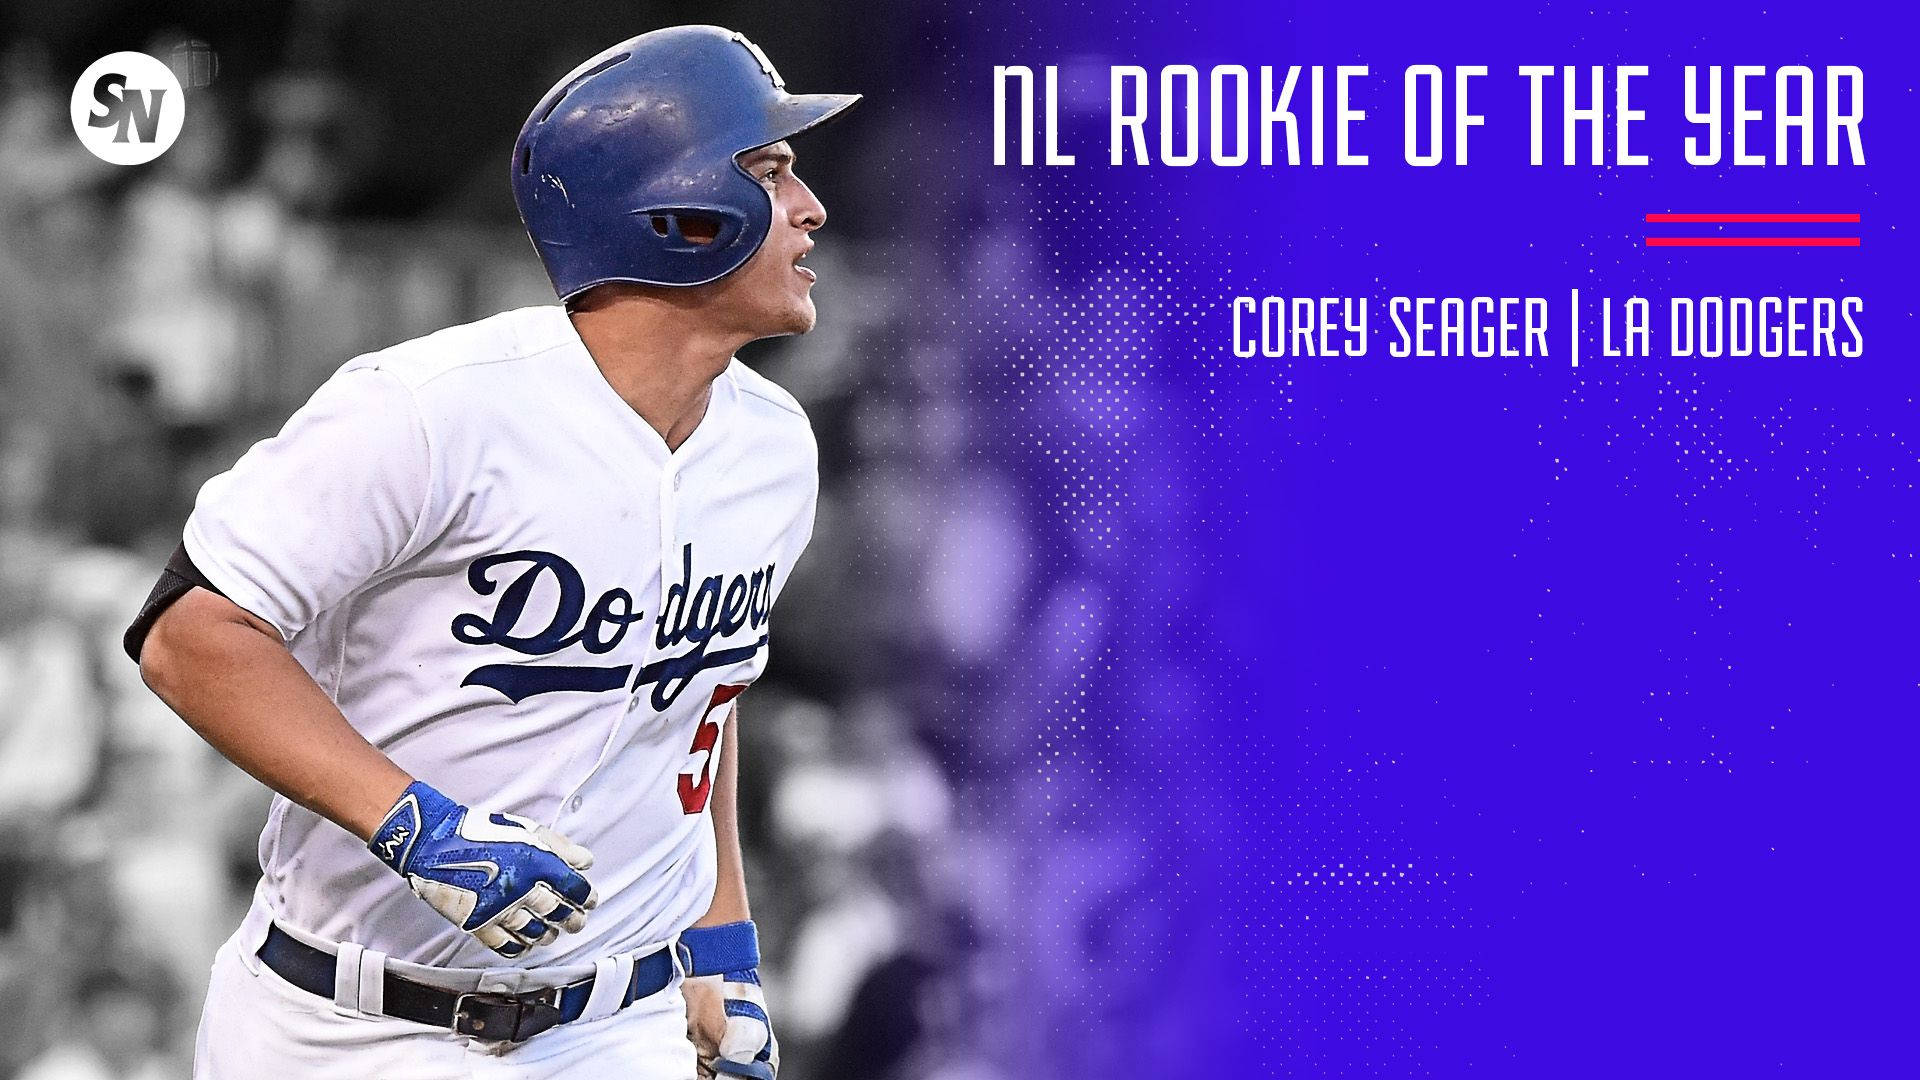 Årets Corey Seager Nl Rookie Wallpaper